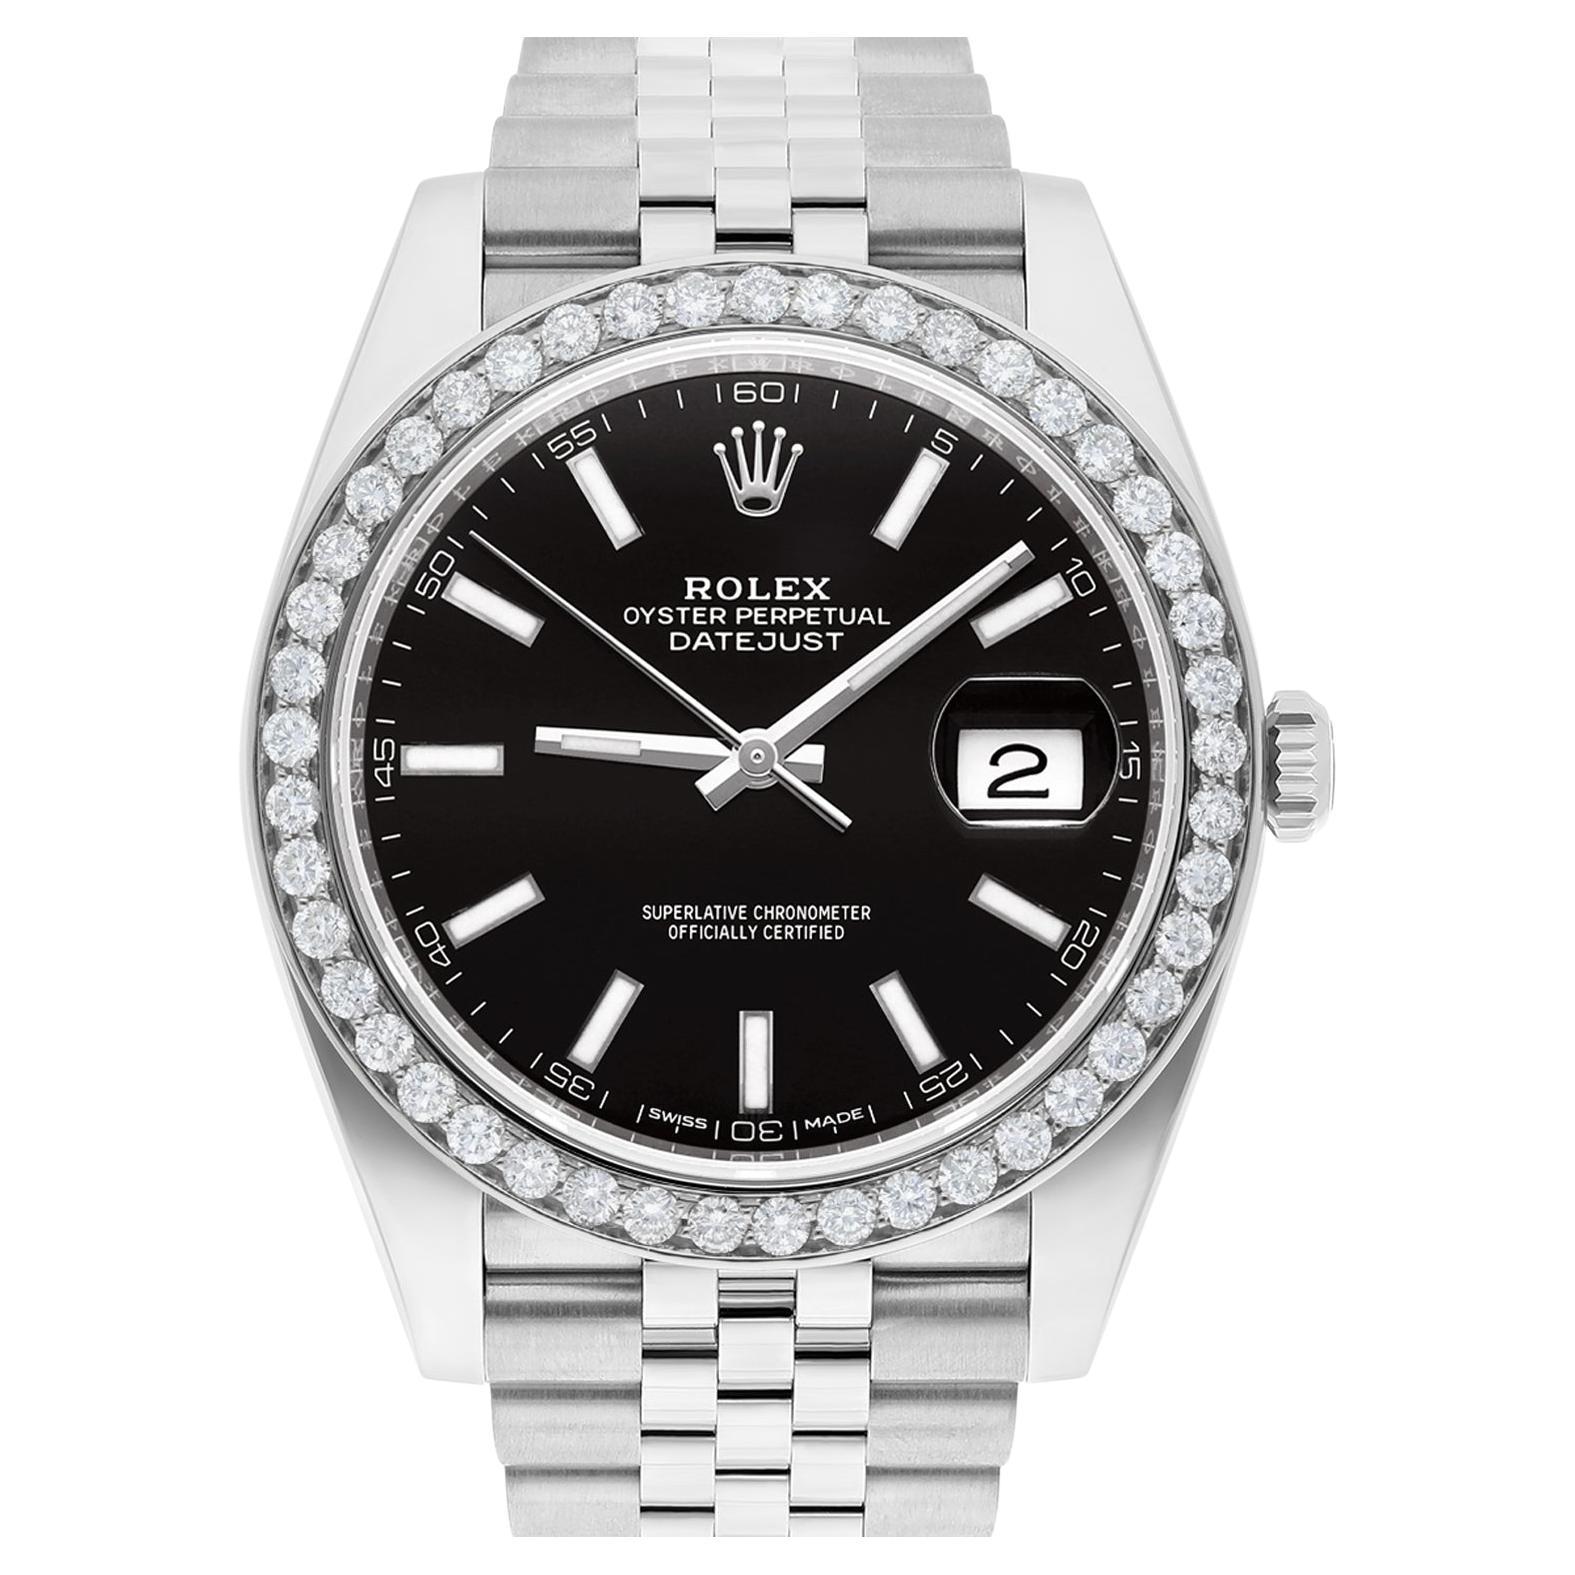 Does a Rolex hold value?